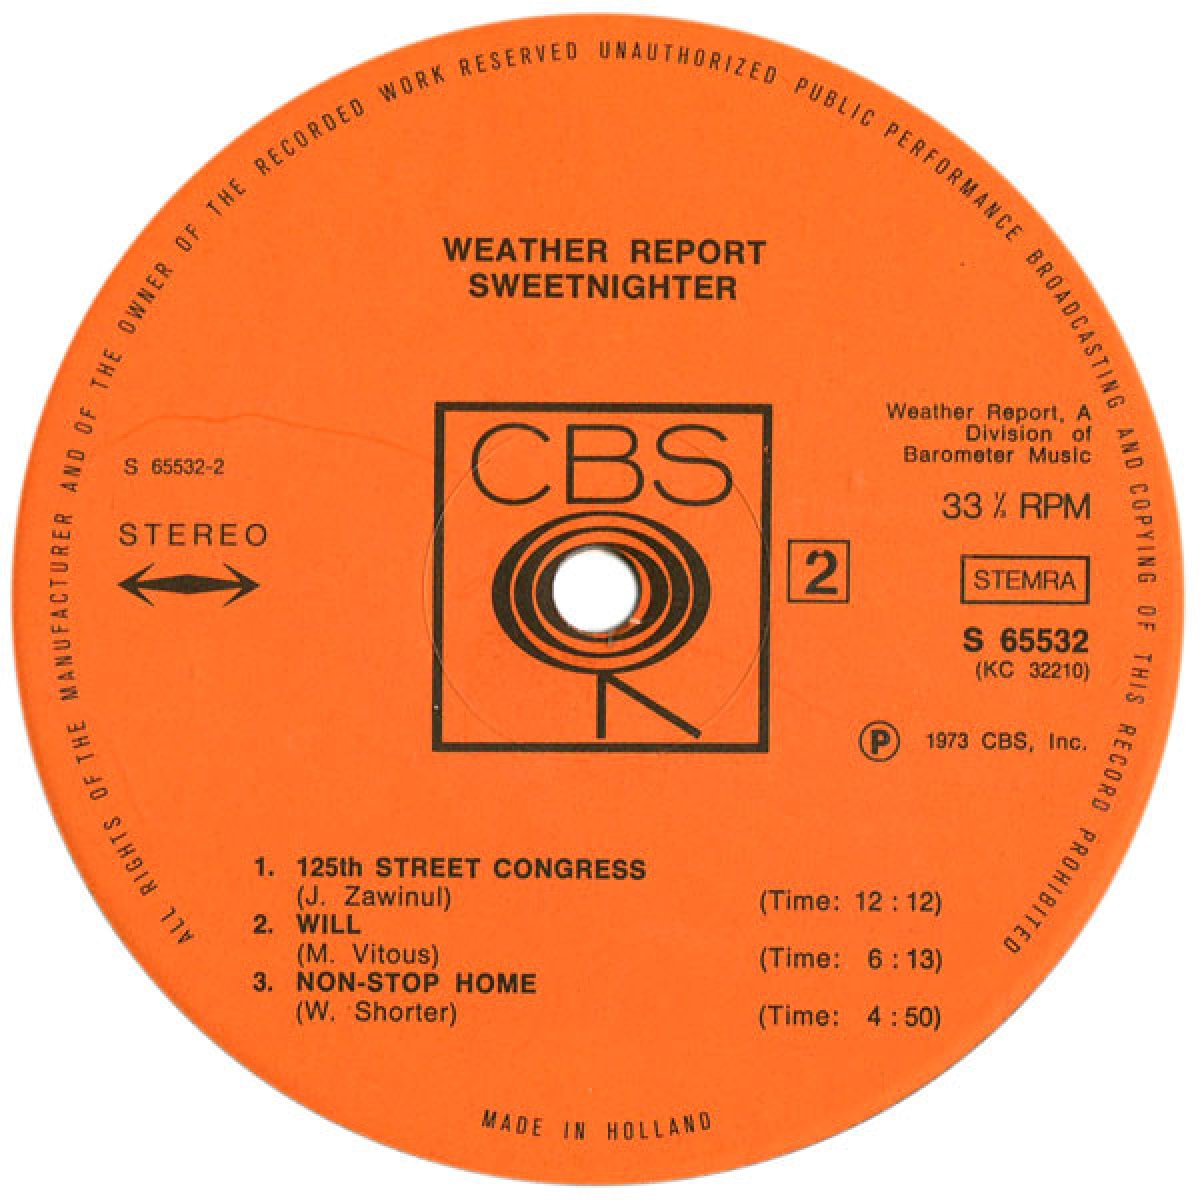 Weather Report "Sweetnighter"